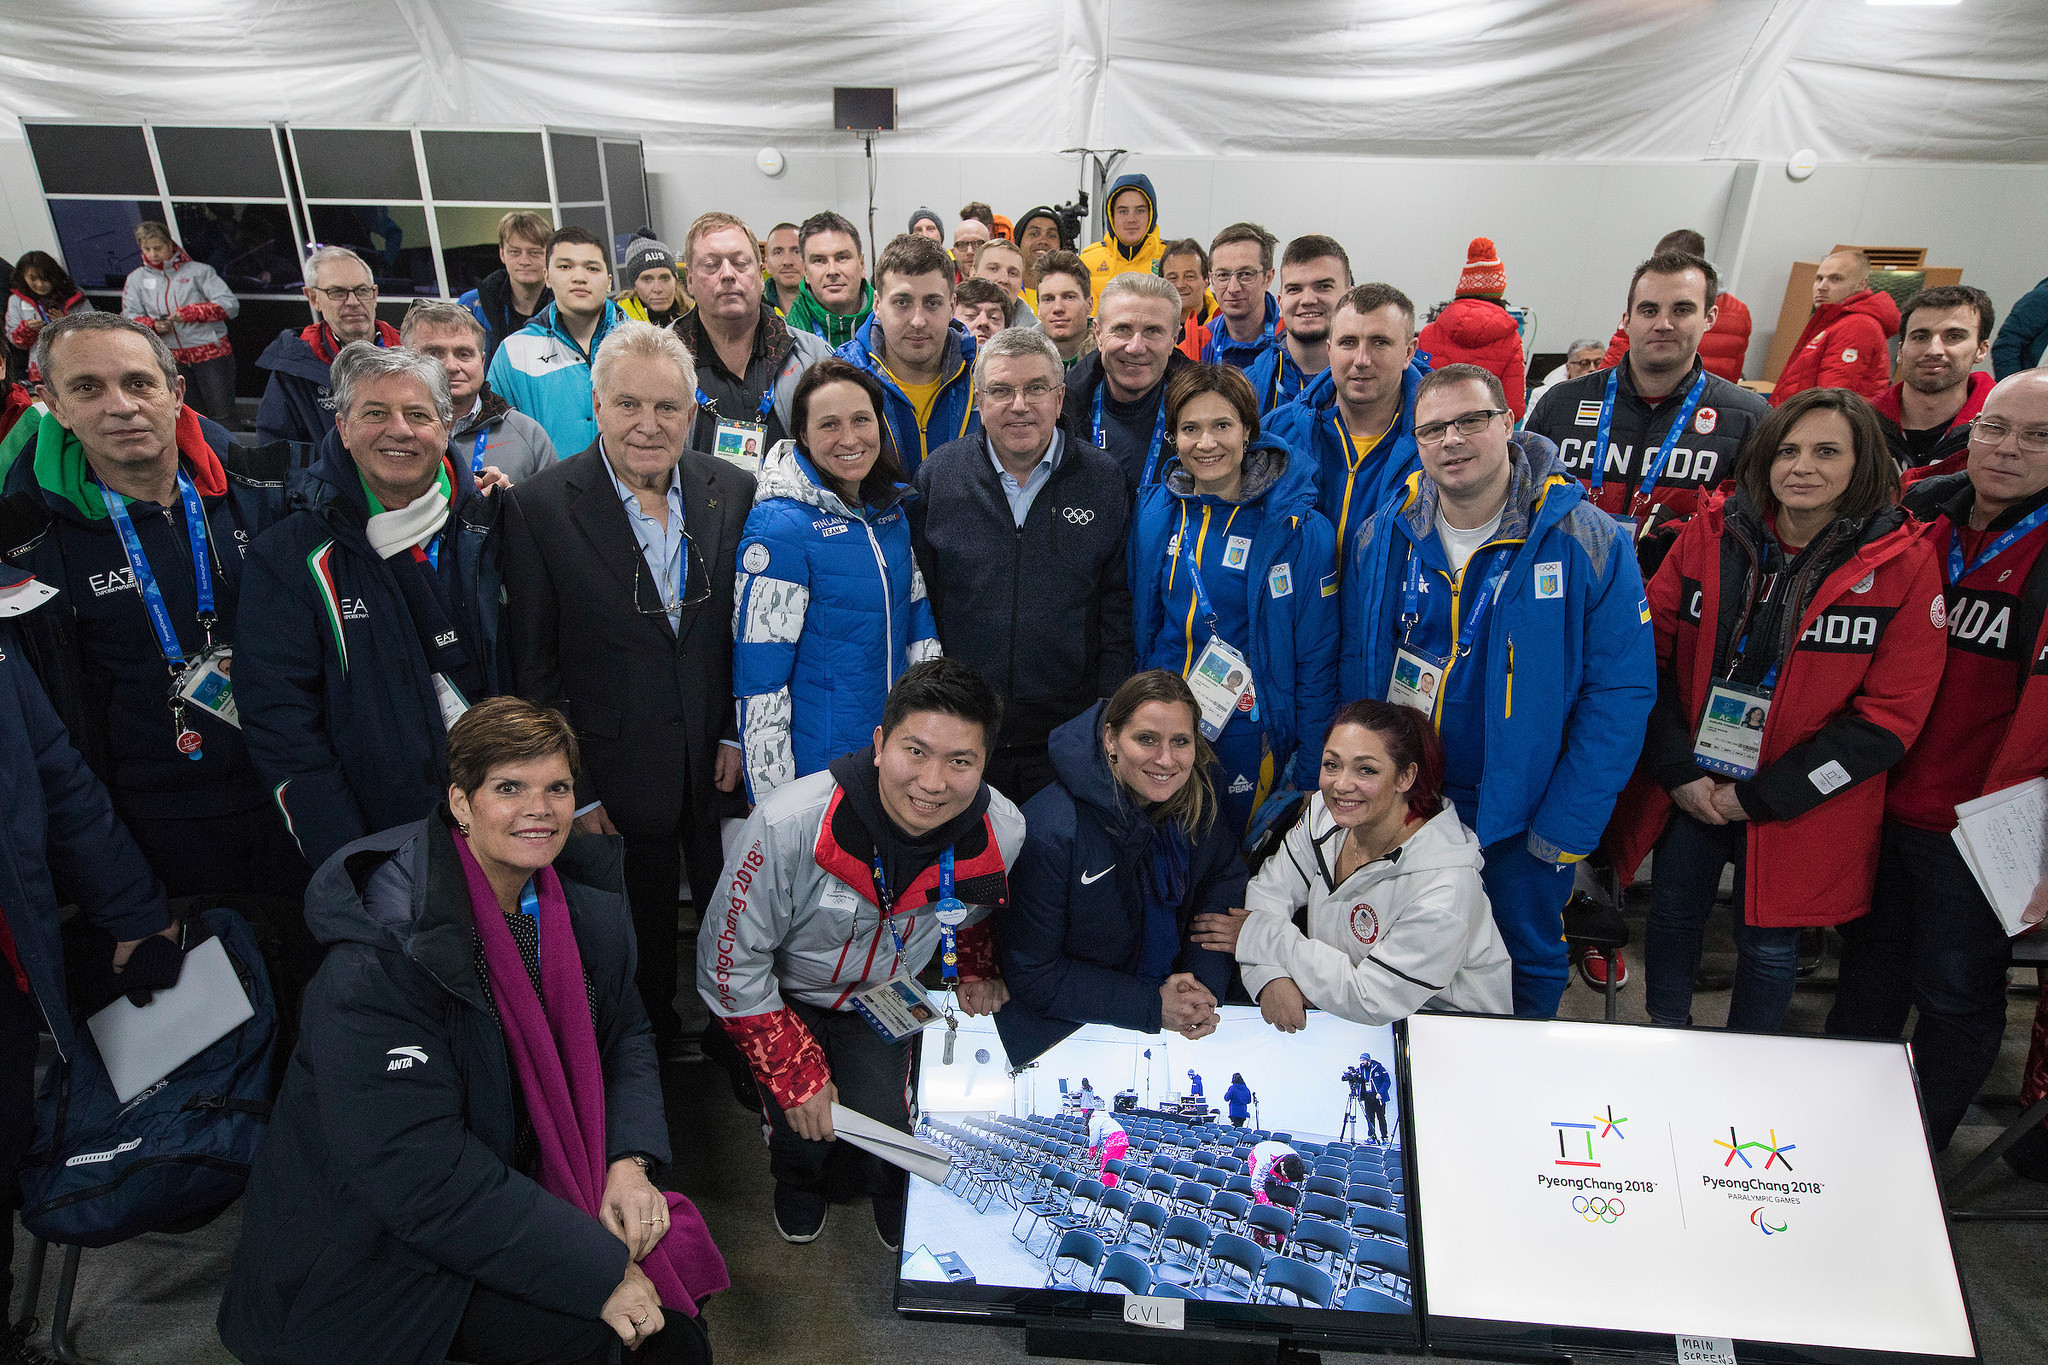 IOC President Thomas Bach poses in the Athletes' Village ©IOC/Flickr